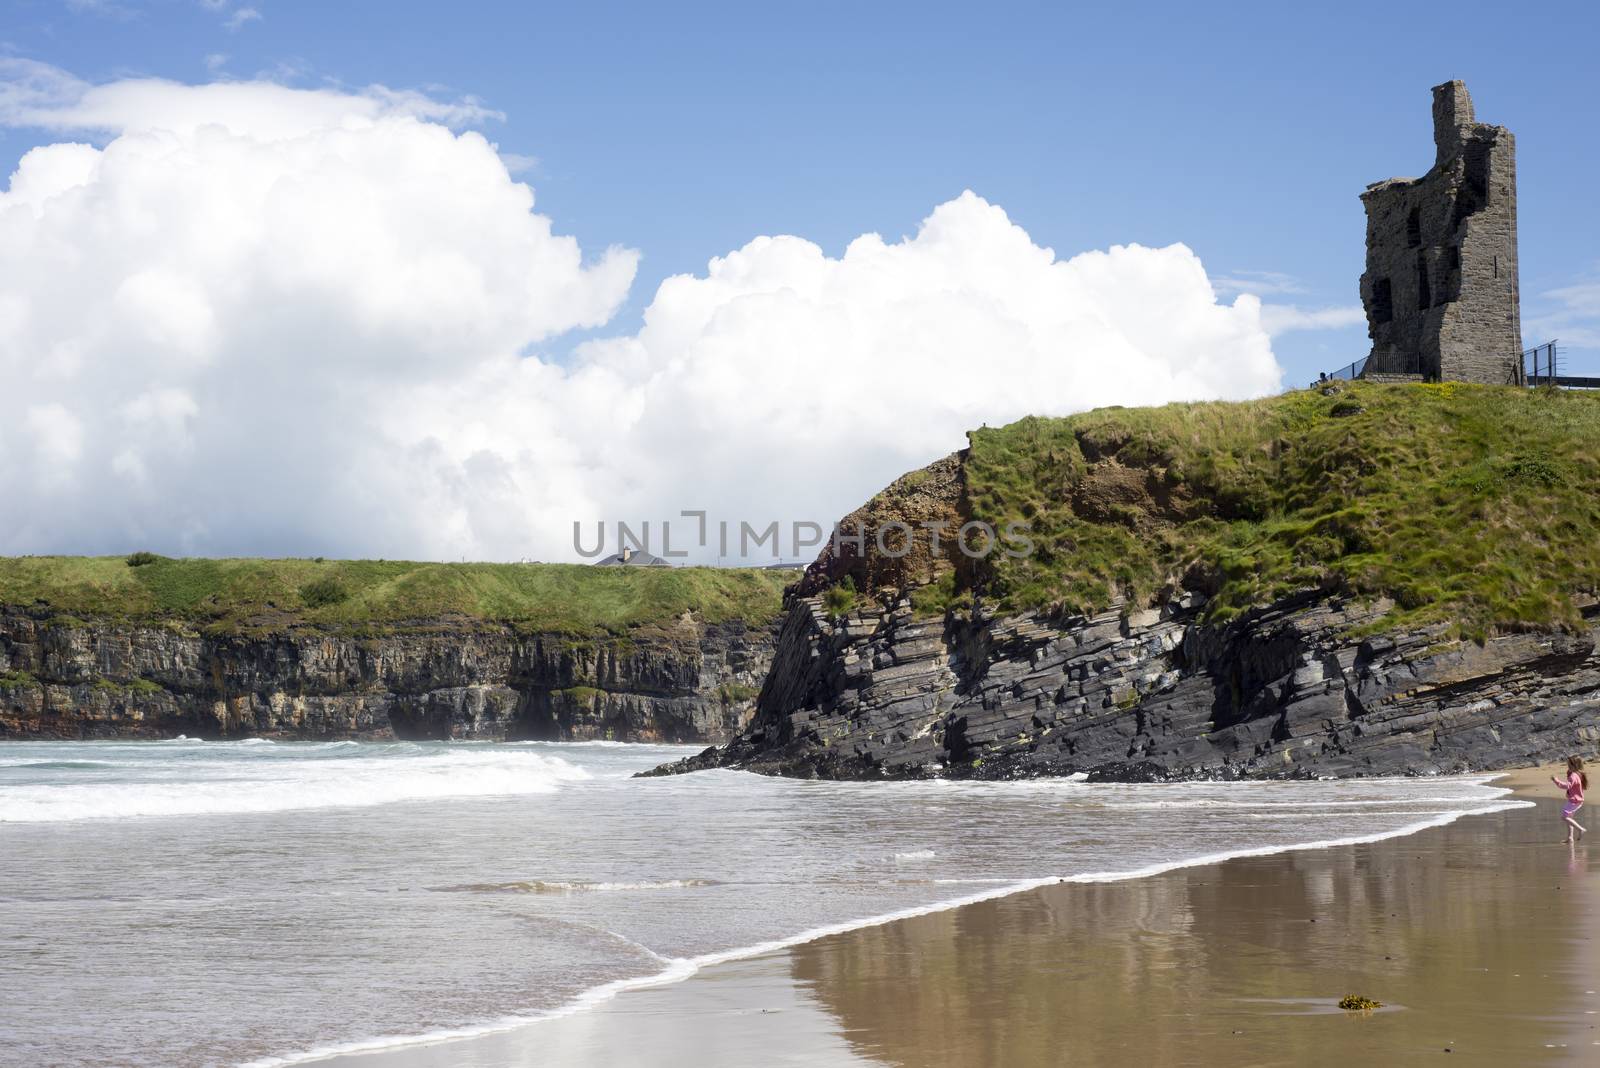 young child on the beach with cliffs and castle on ballybunion beach county kerry ireland